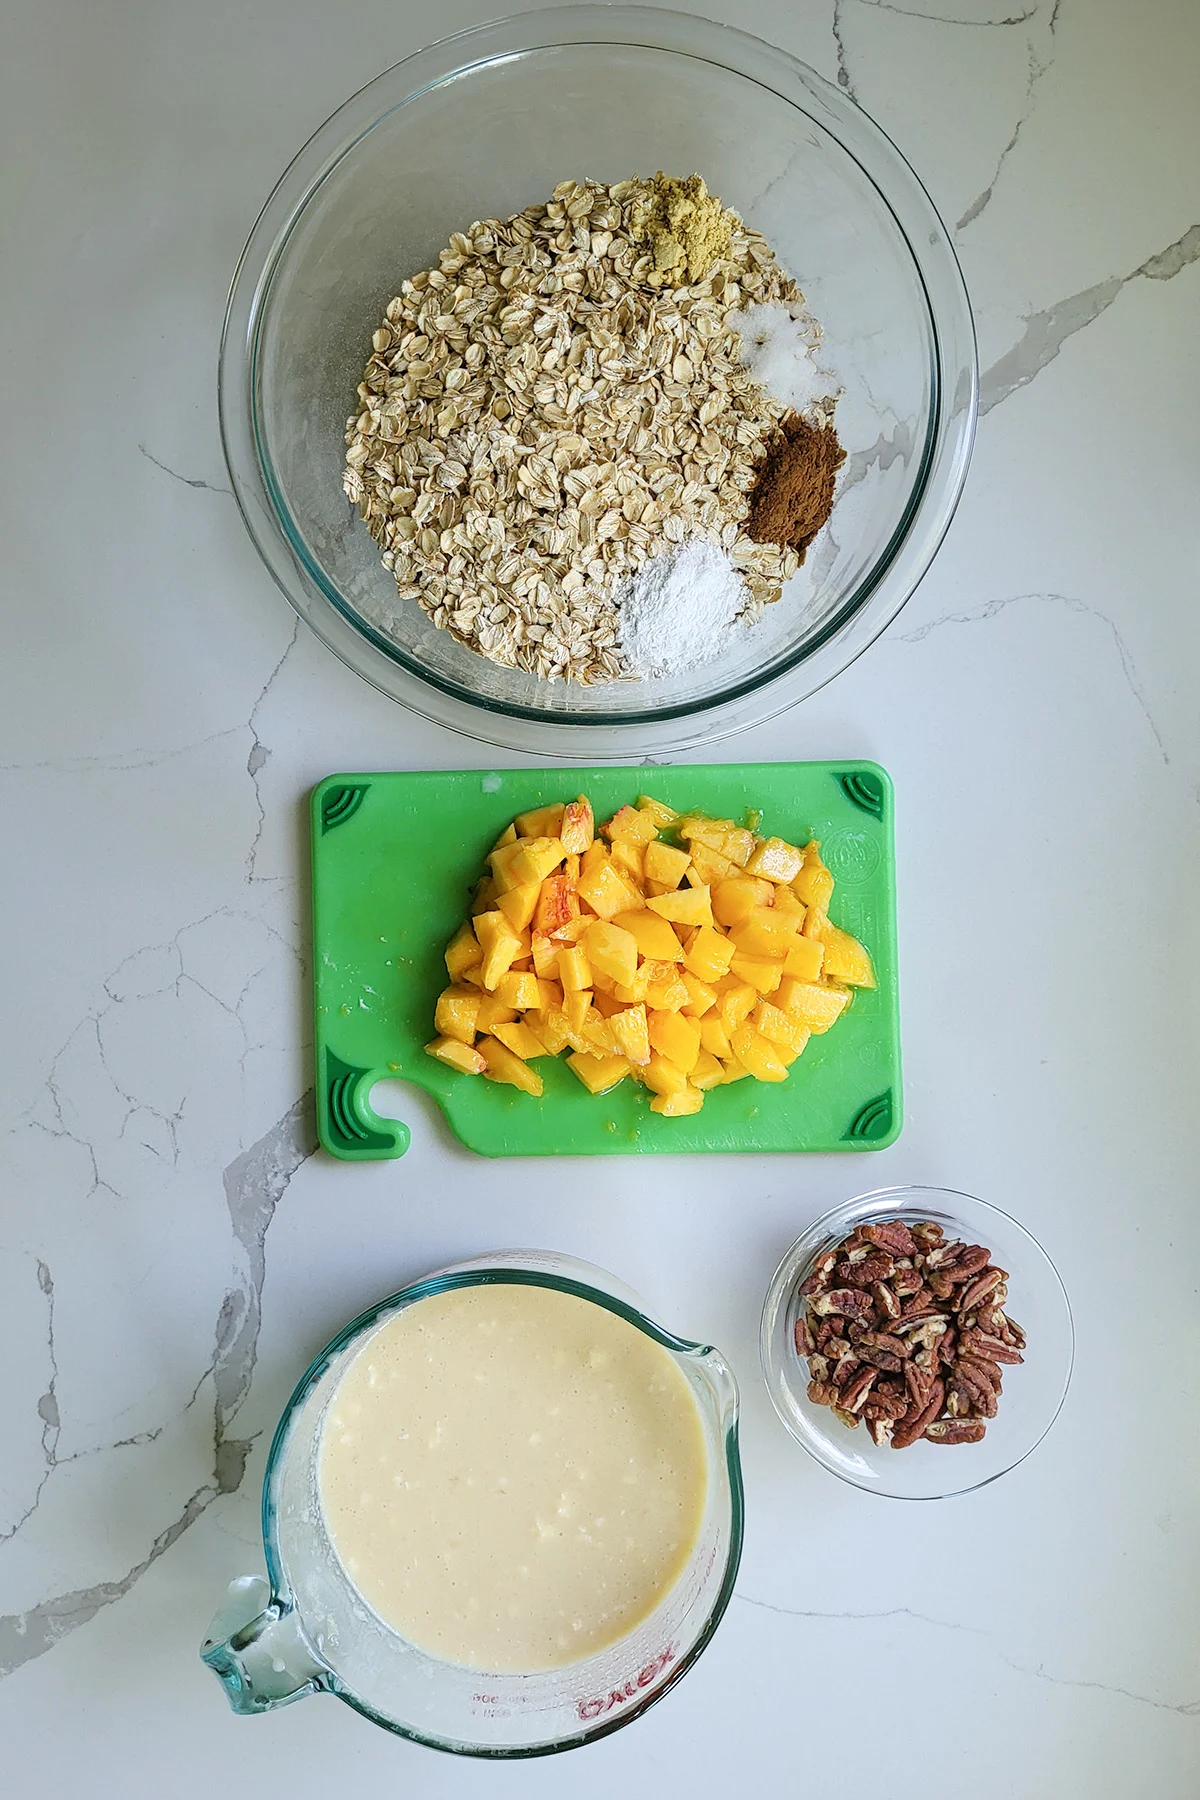 a bowl of oats and spices, a chopped peach, a bowl of pecan pieces and a cup of milk.